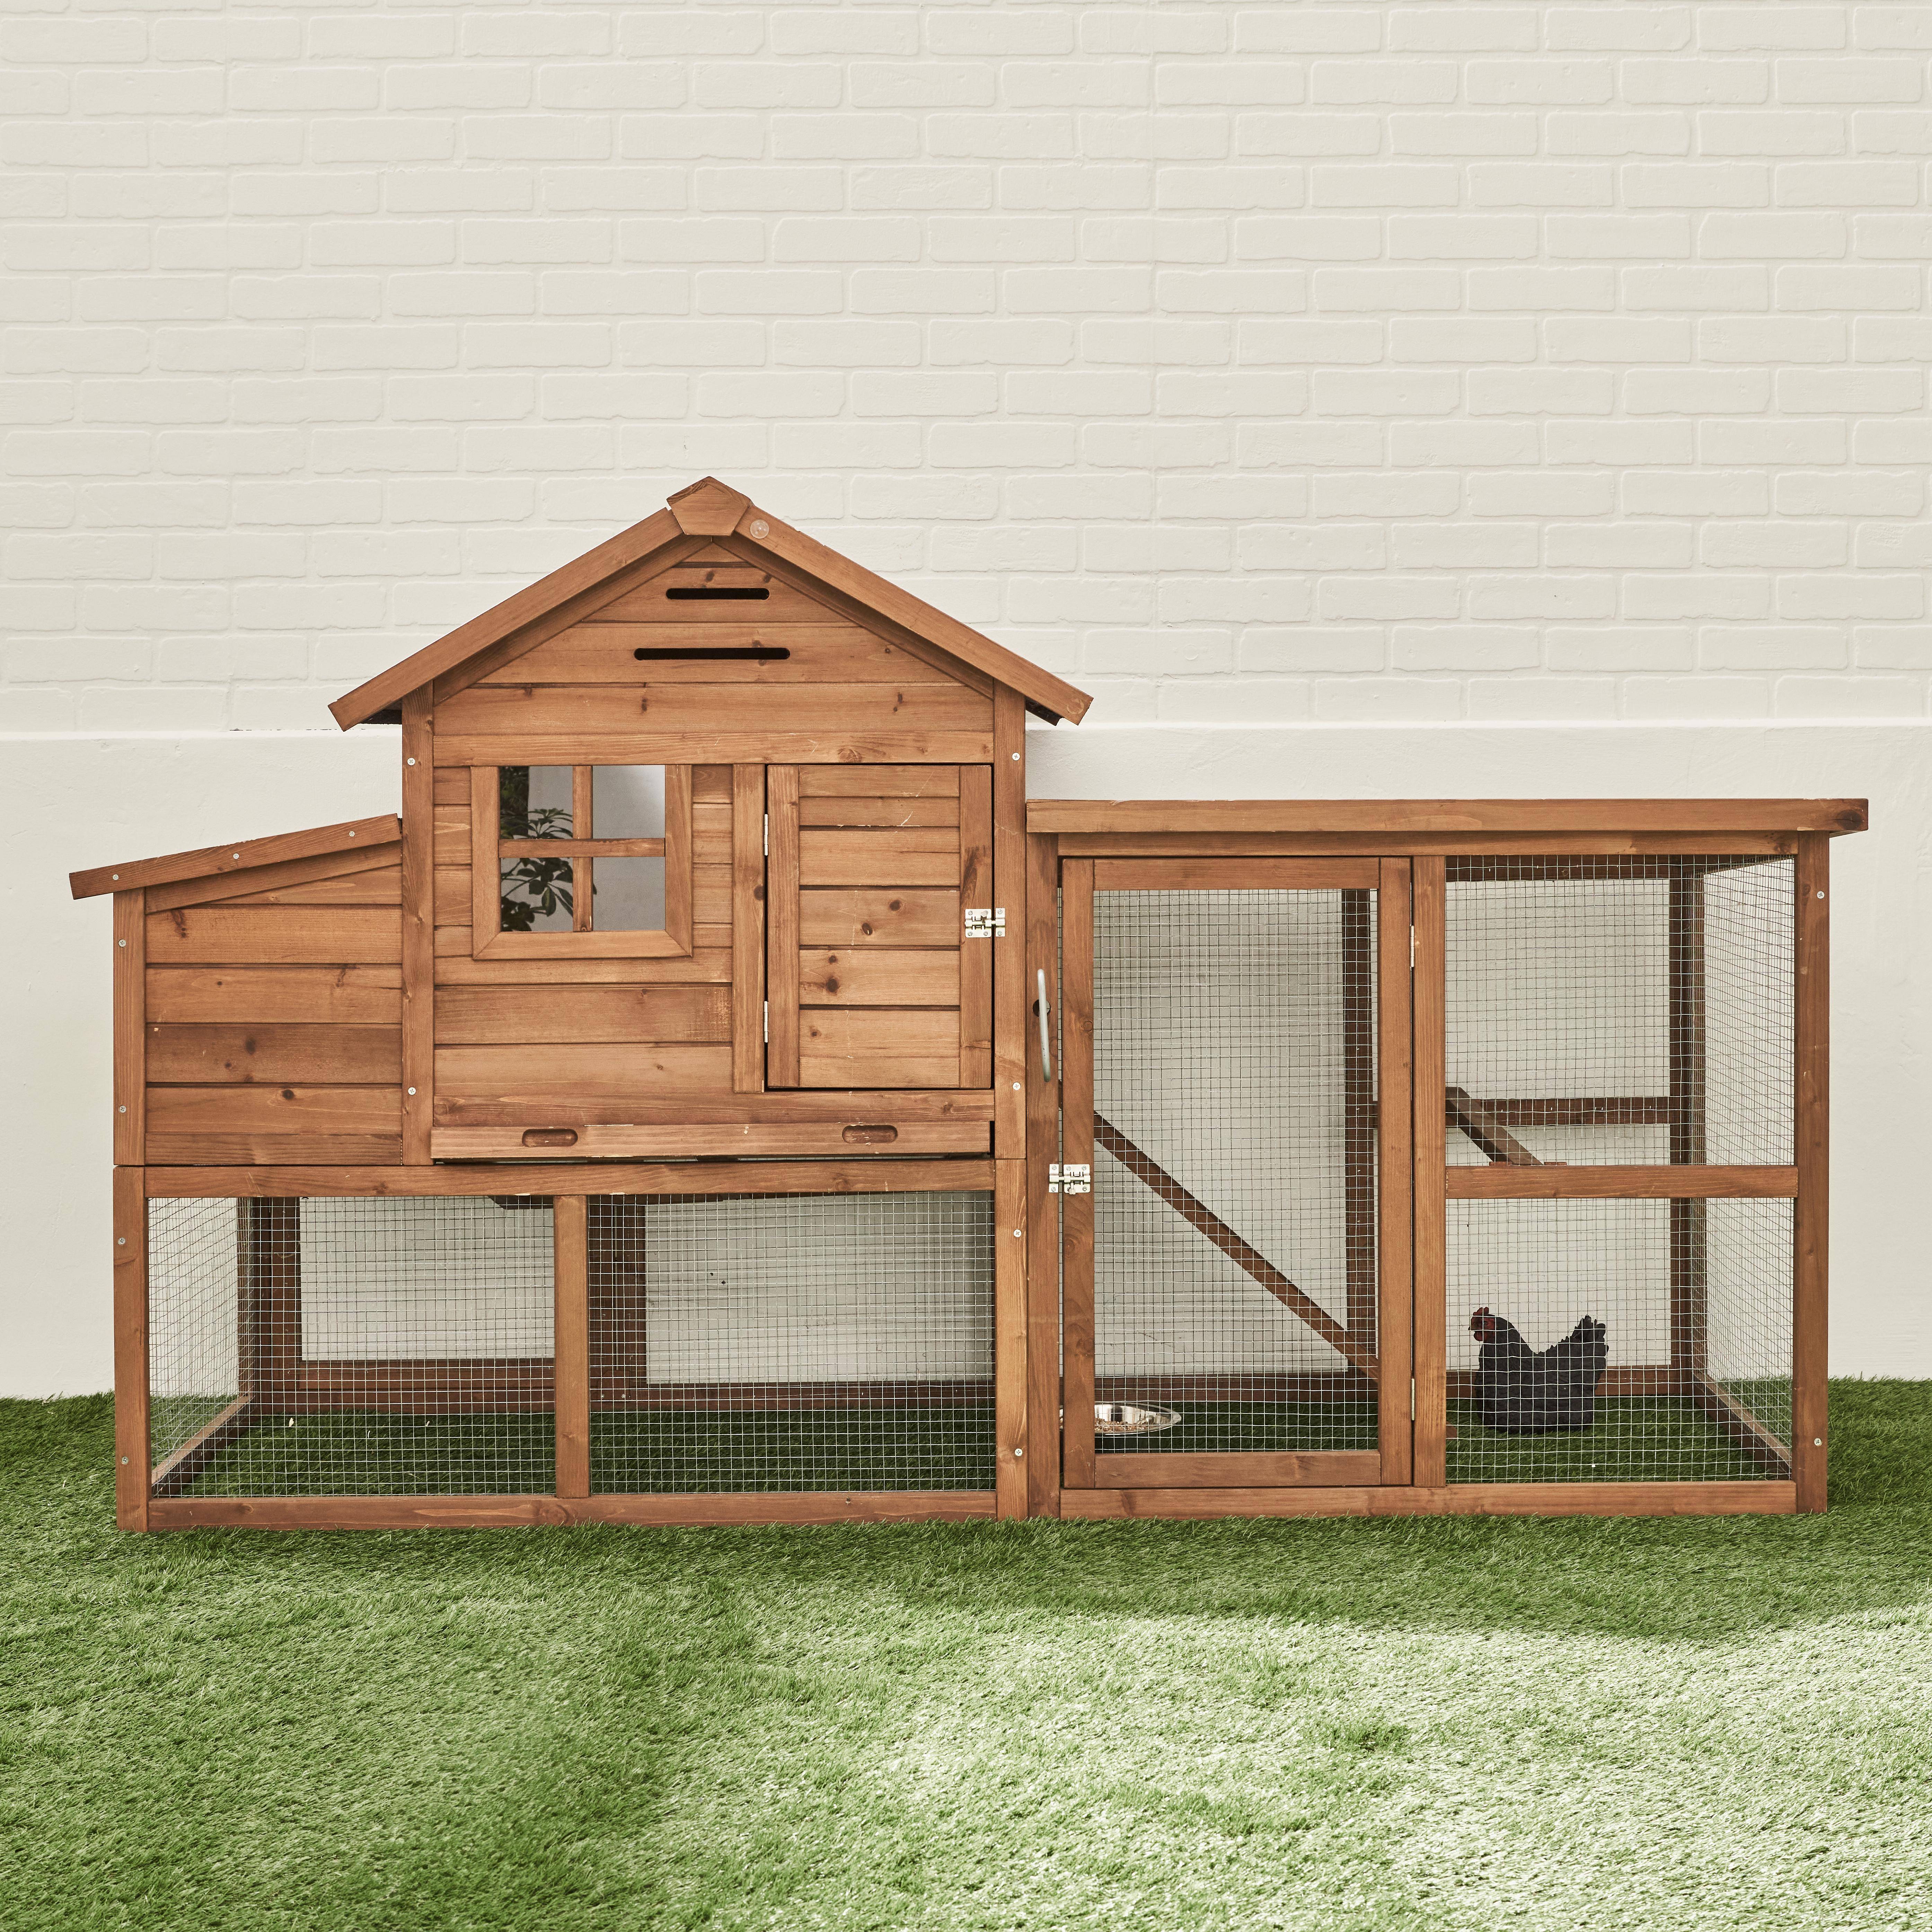 Wooden chicken coop for 4 chickens with nesting box, 195.5x75.5x116.5cm - Geline - Wood colour,sweeek,Photo2